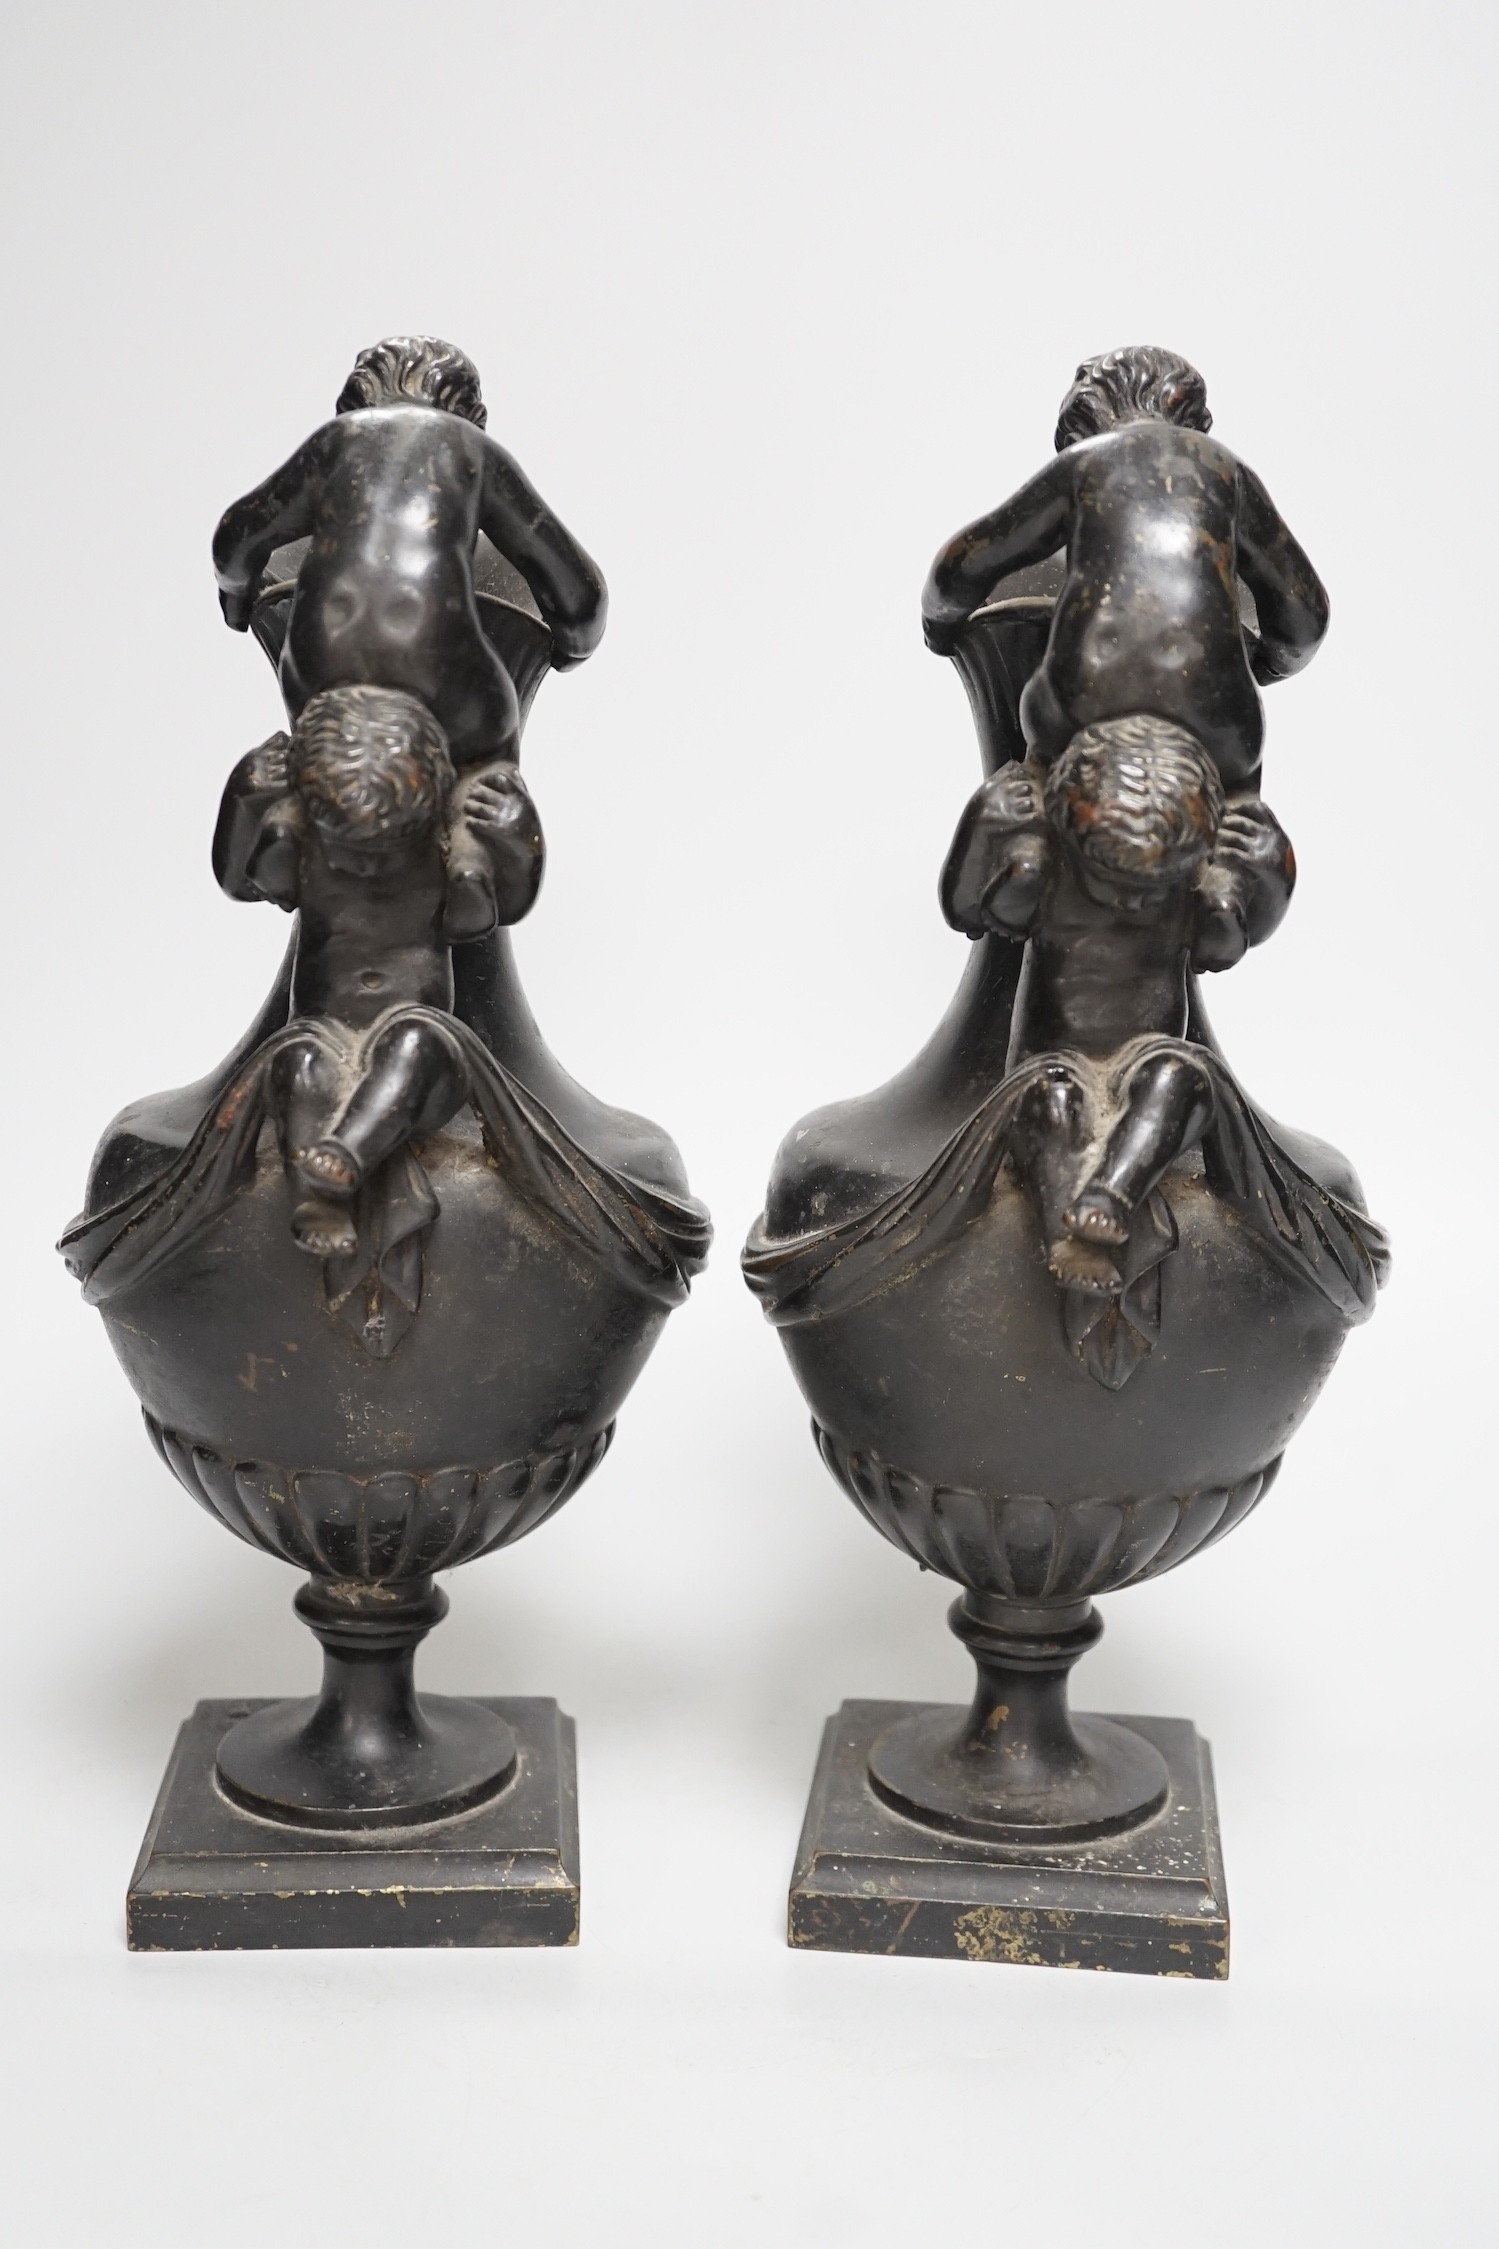 A pair of classical revival bronze urn side ornaments with cast rams head bodies. 32cm tall